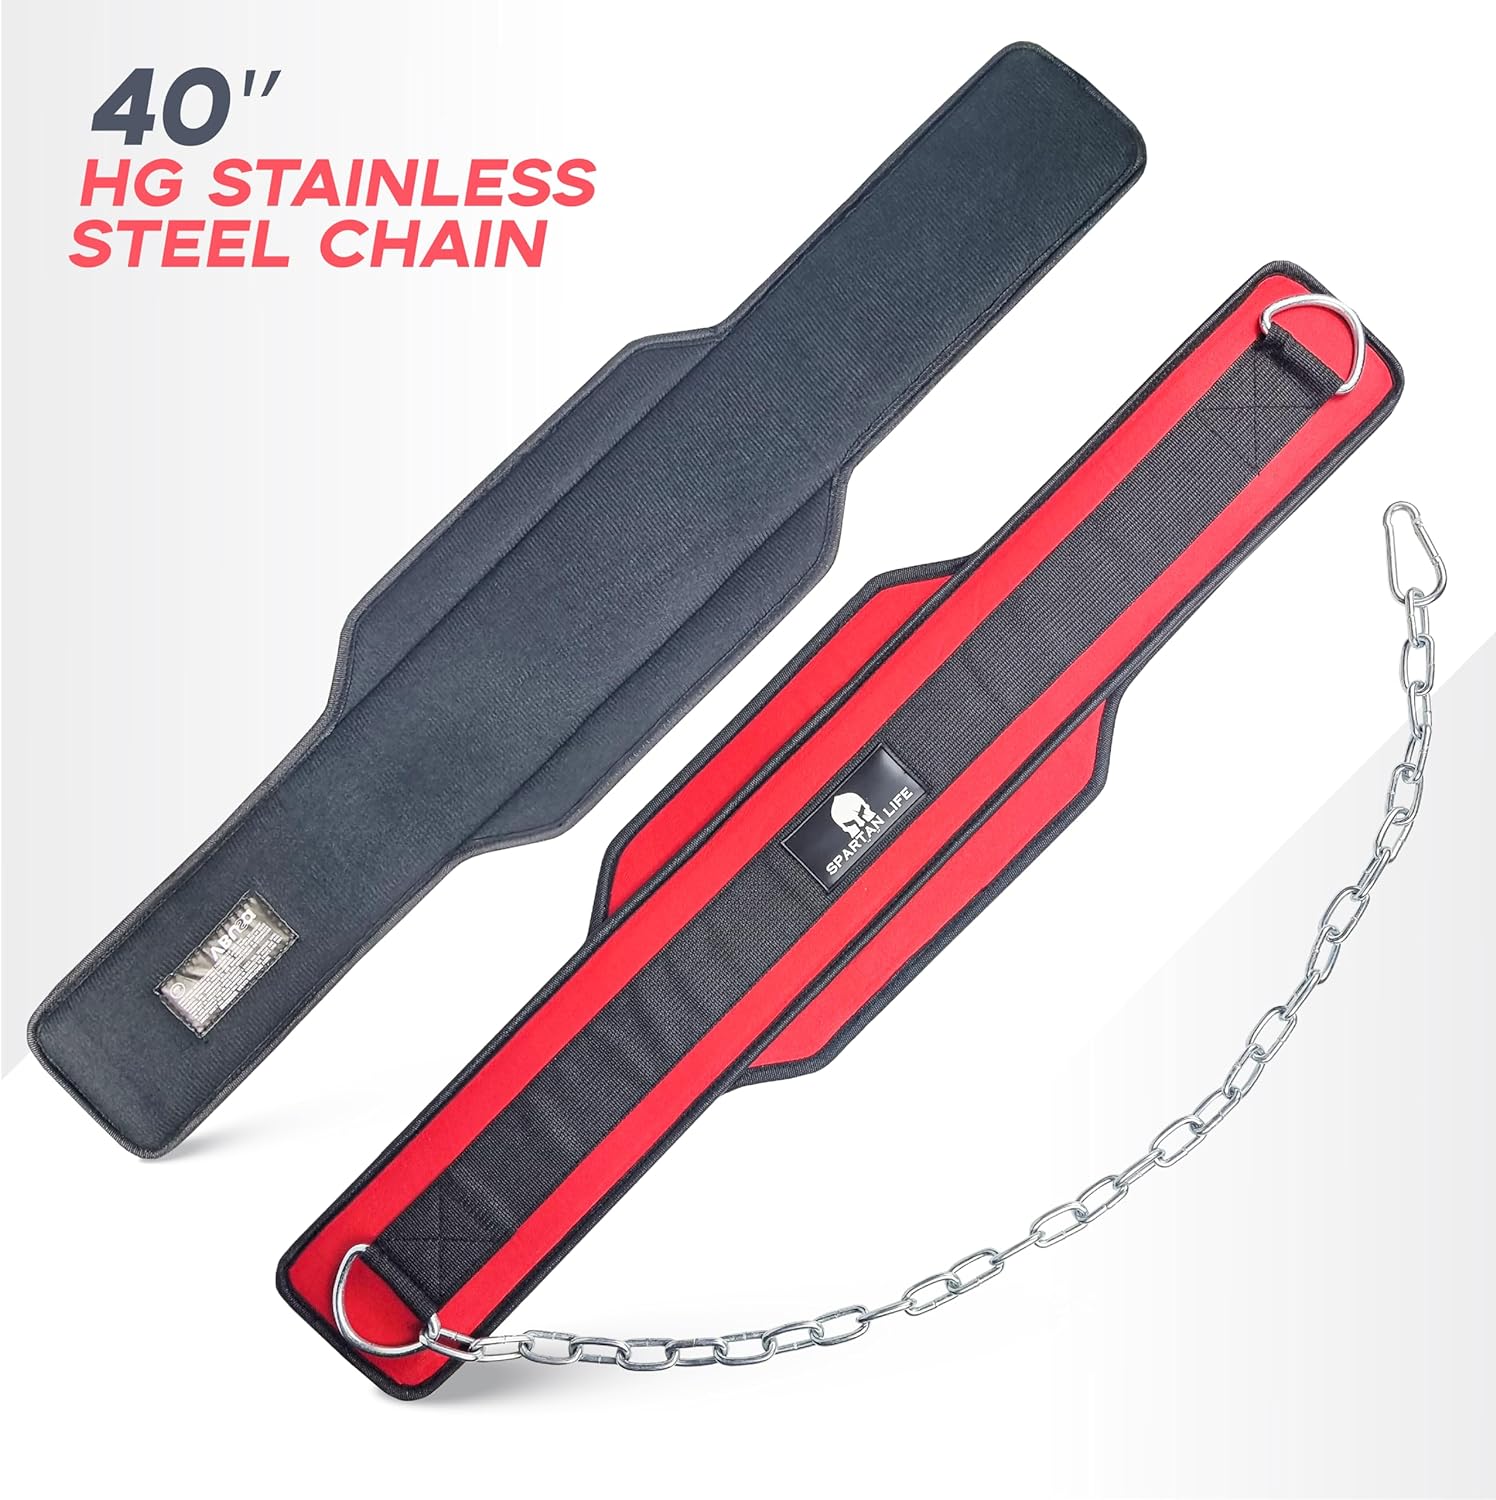 heavy-duty-weightlifting-belt-with-chain-for-pullup